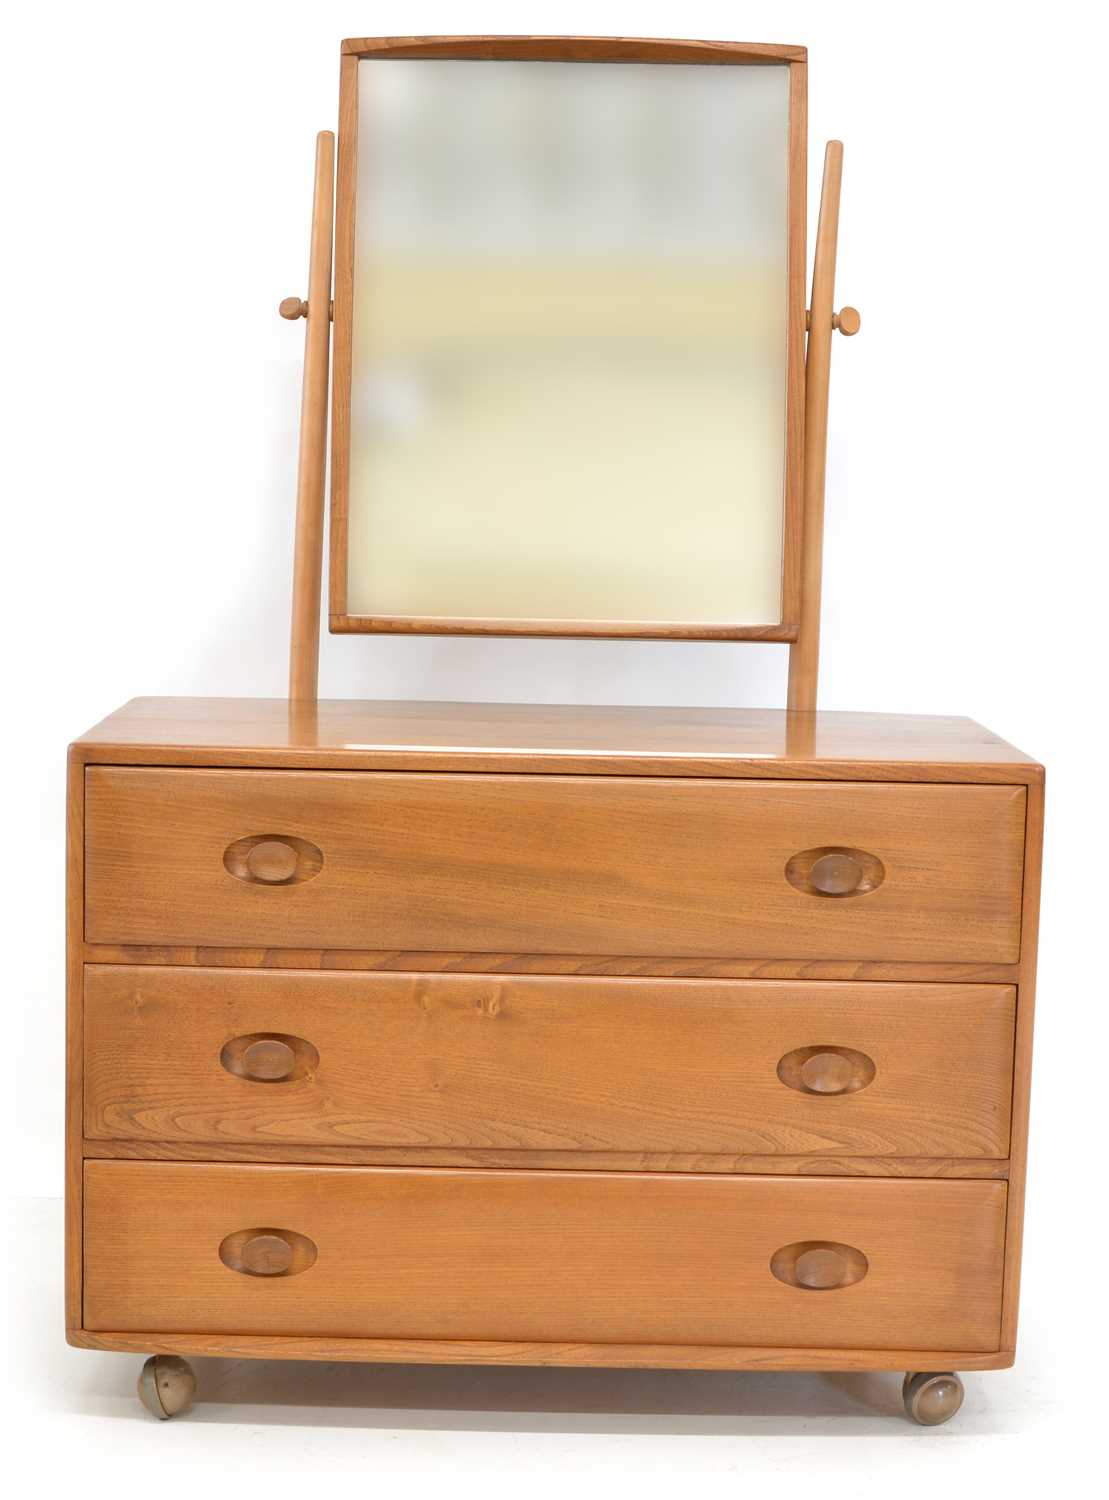 Lot 230 - Ercol Dressing Chest with Swing Mirror